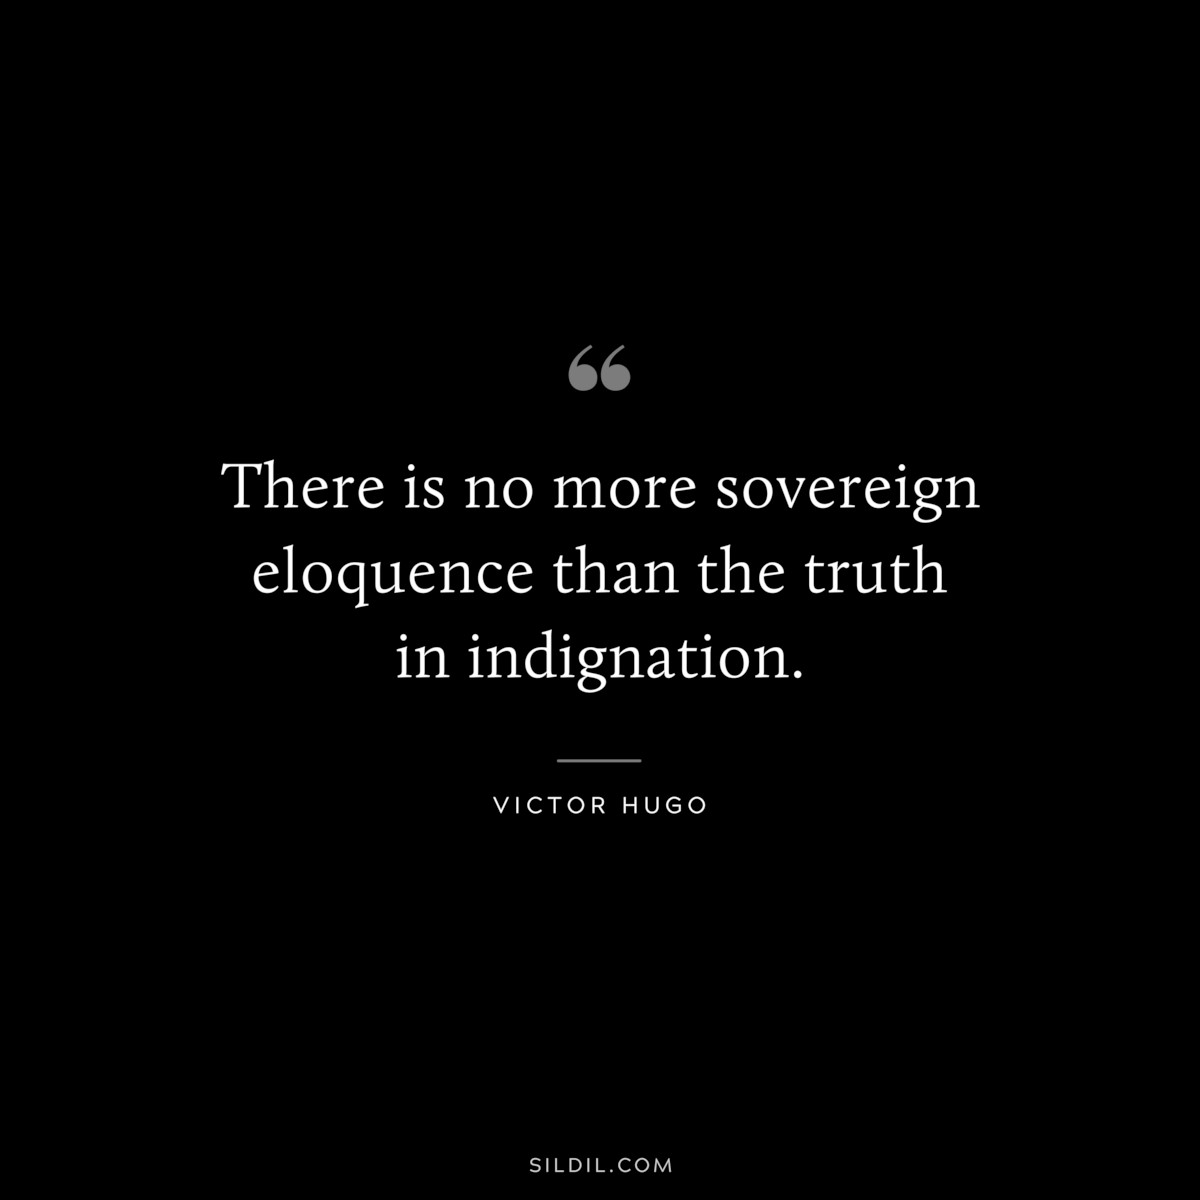 There is no more sovereign eloquence than the truth in indignation― Victor Hugo